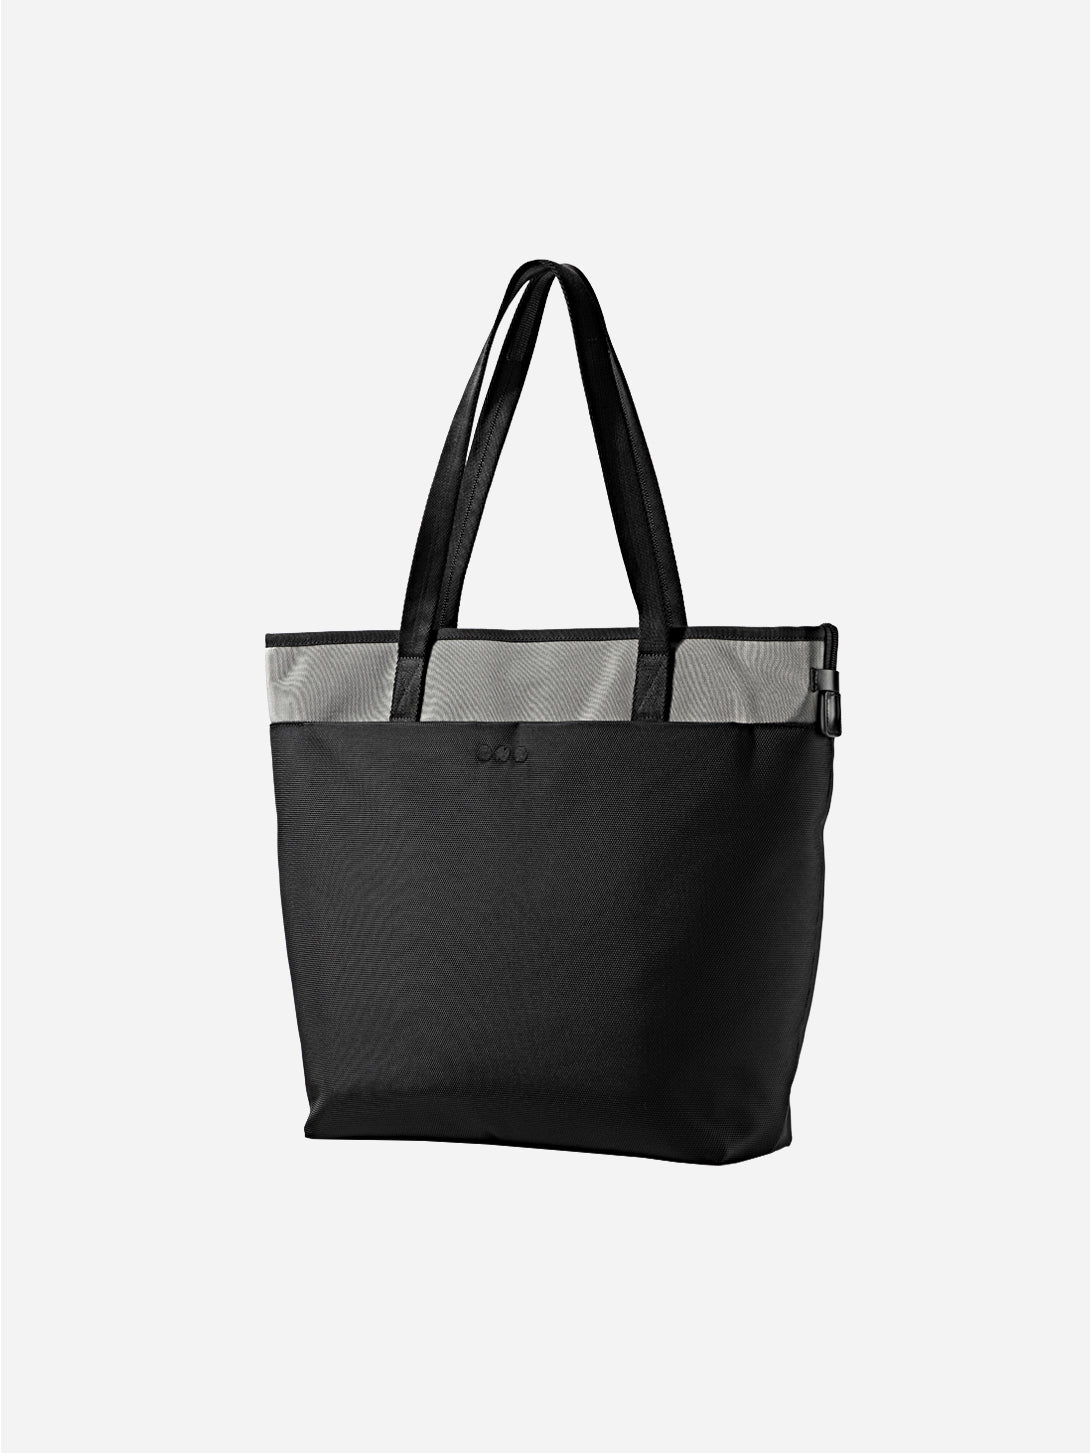 Charcoal All-Things Tote Bag ONS Clothing Bag Accessory